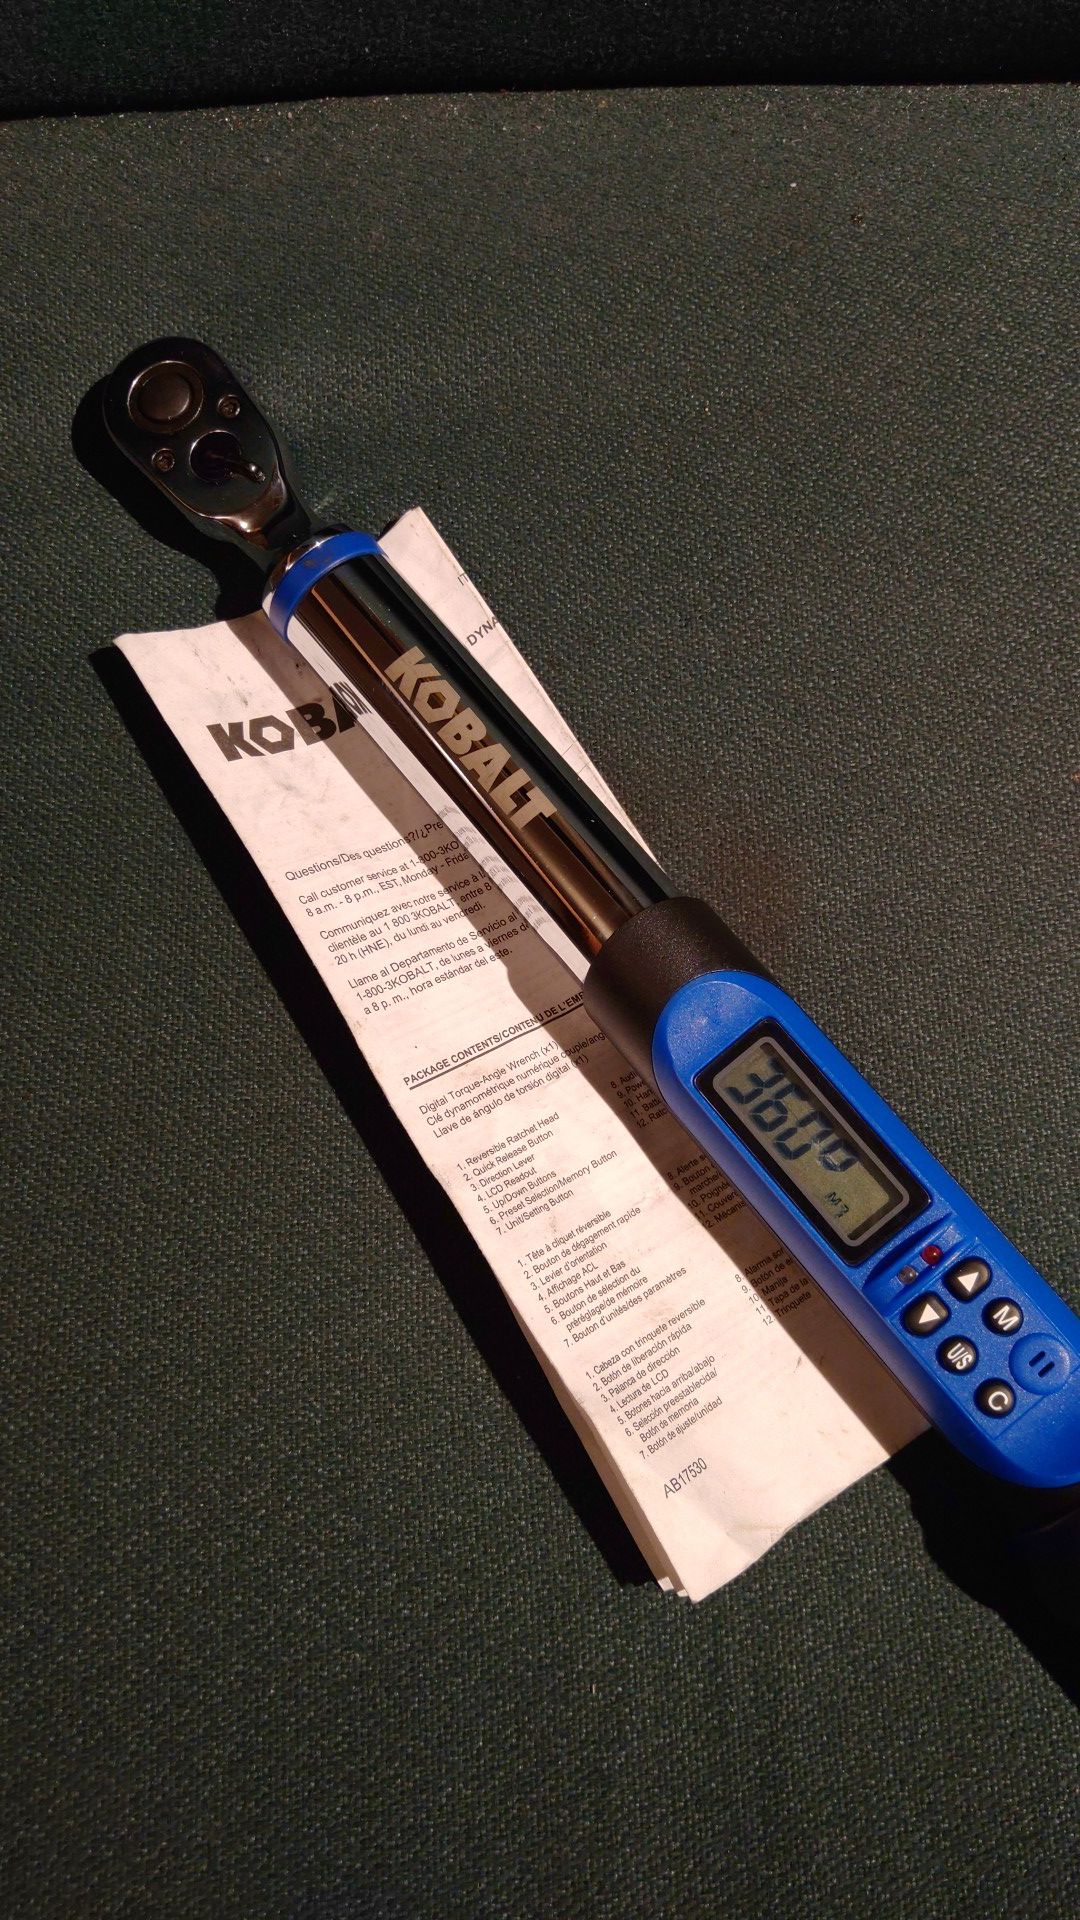 Kobalt electronic torque wrench new open package